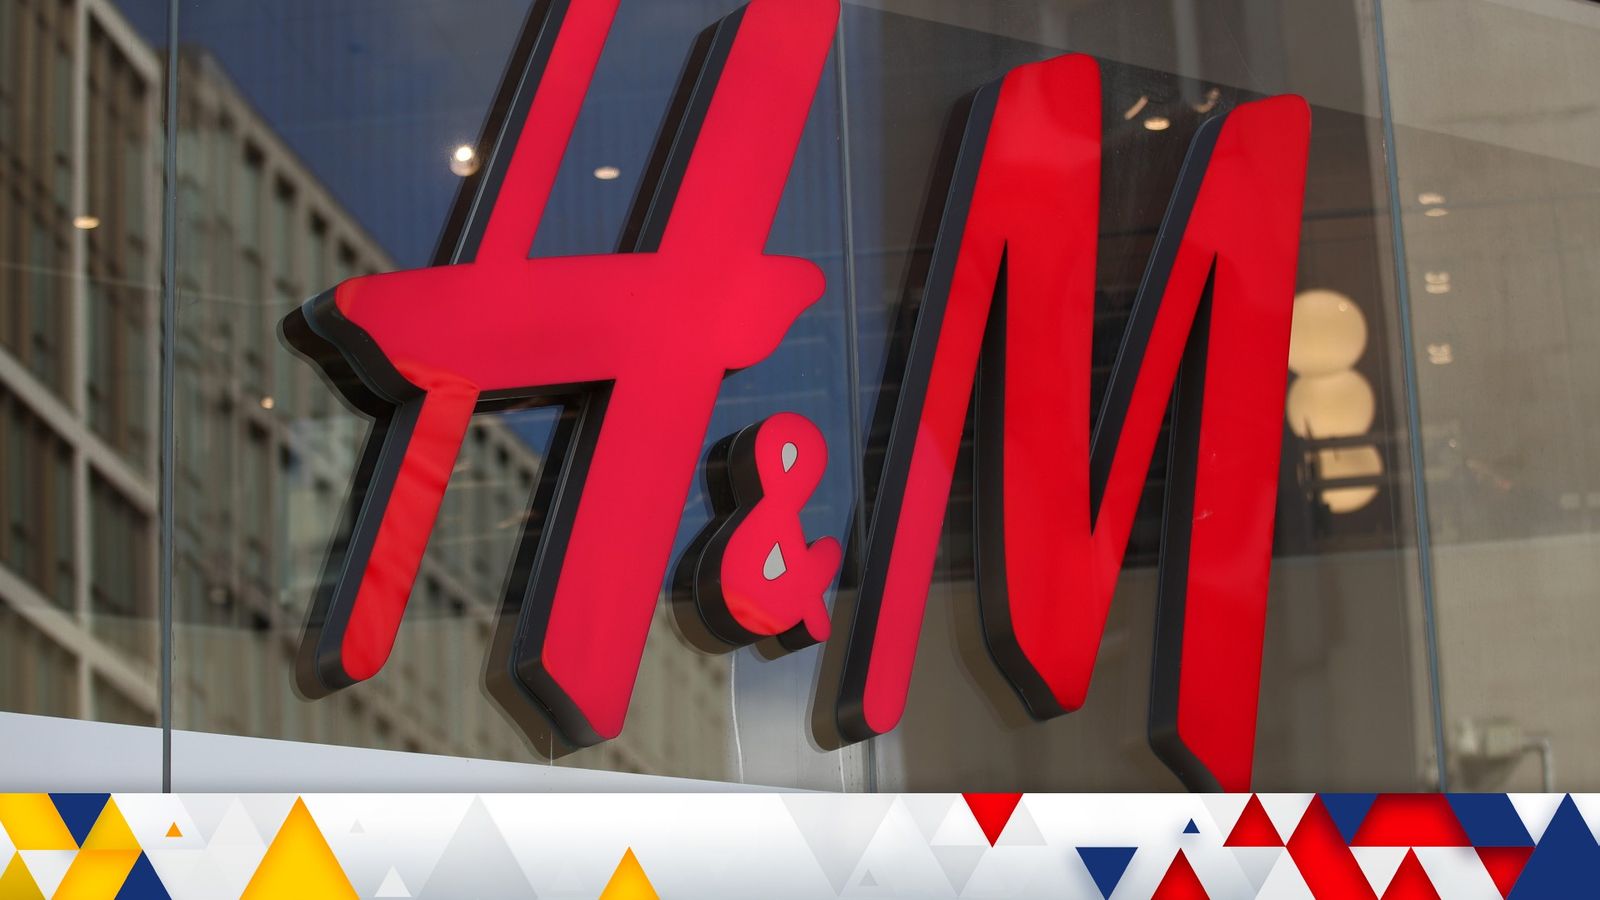 H&M to sell off stock before leaving Russia - BBC News